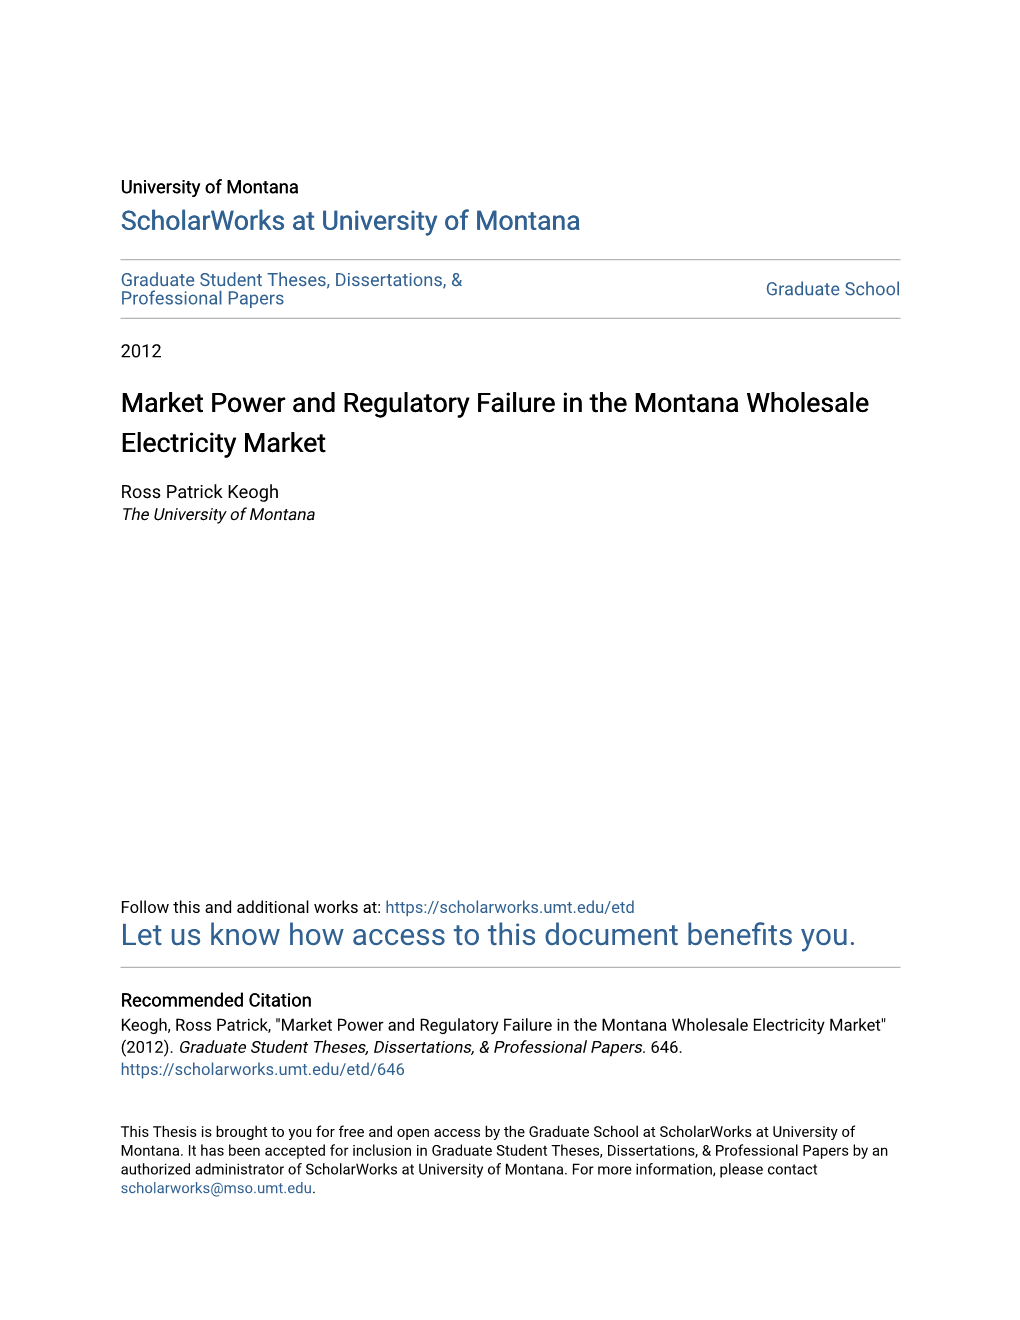 Market Power and Regulatory Failure in the Montana Wholesale Electricity Market